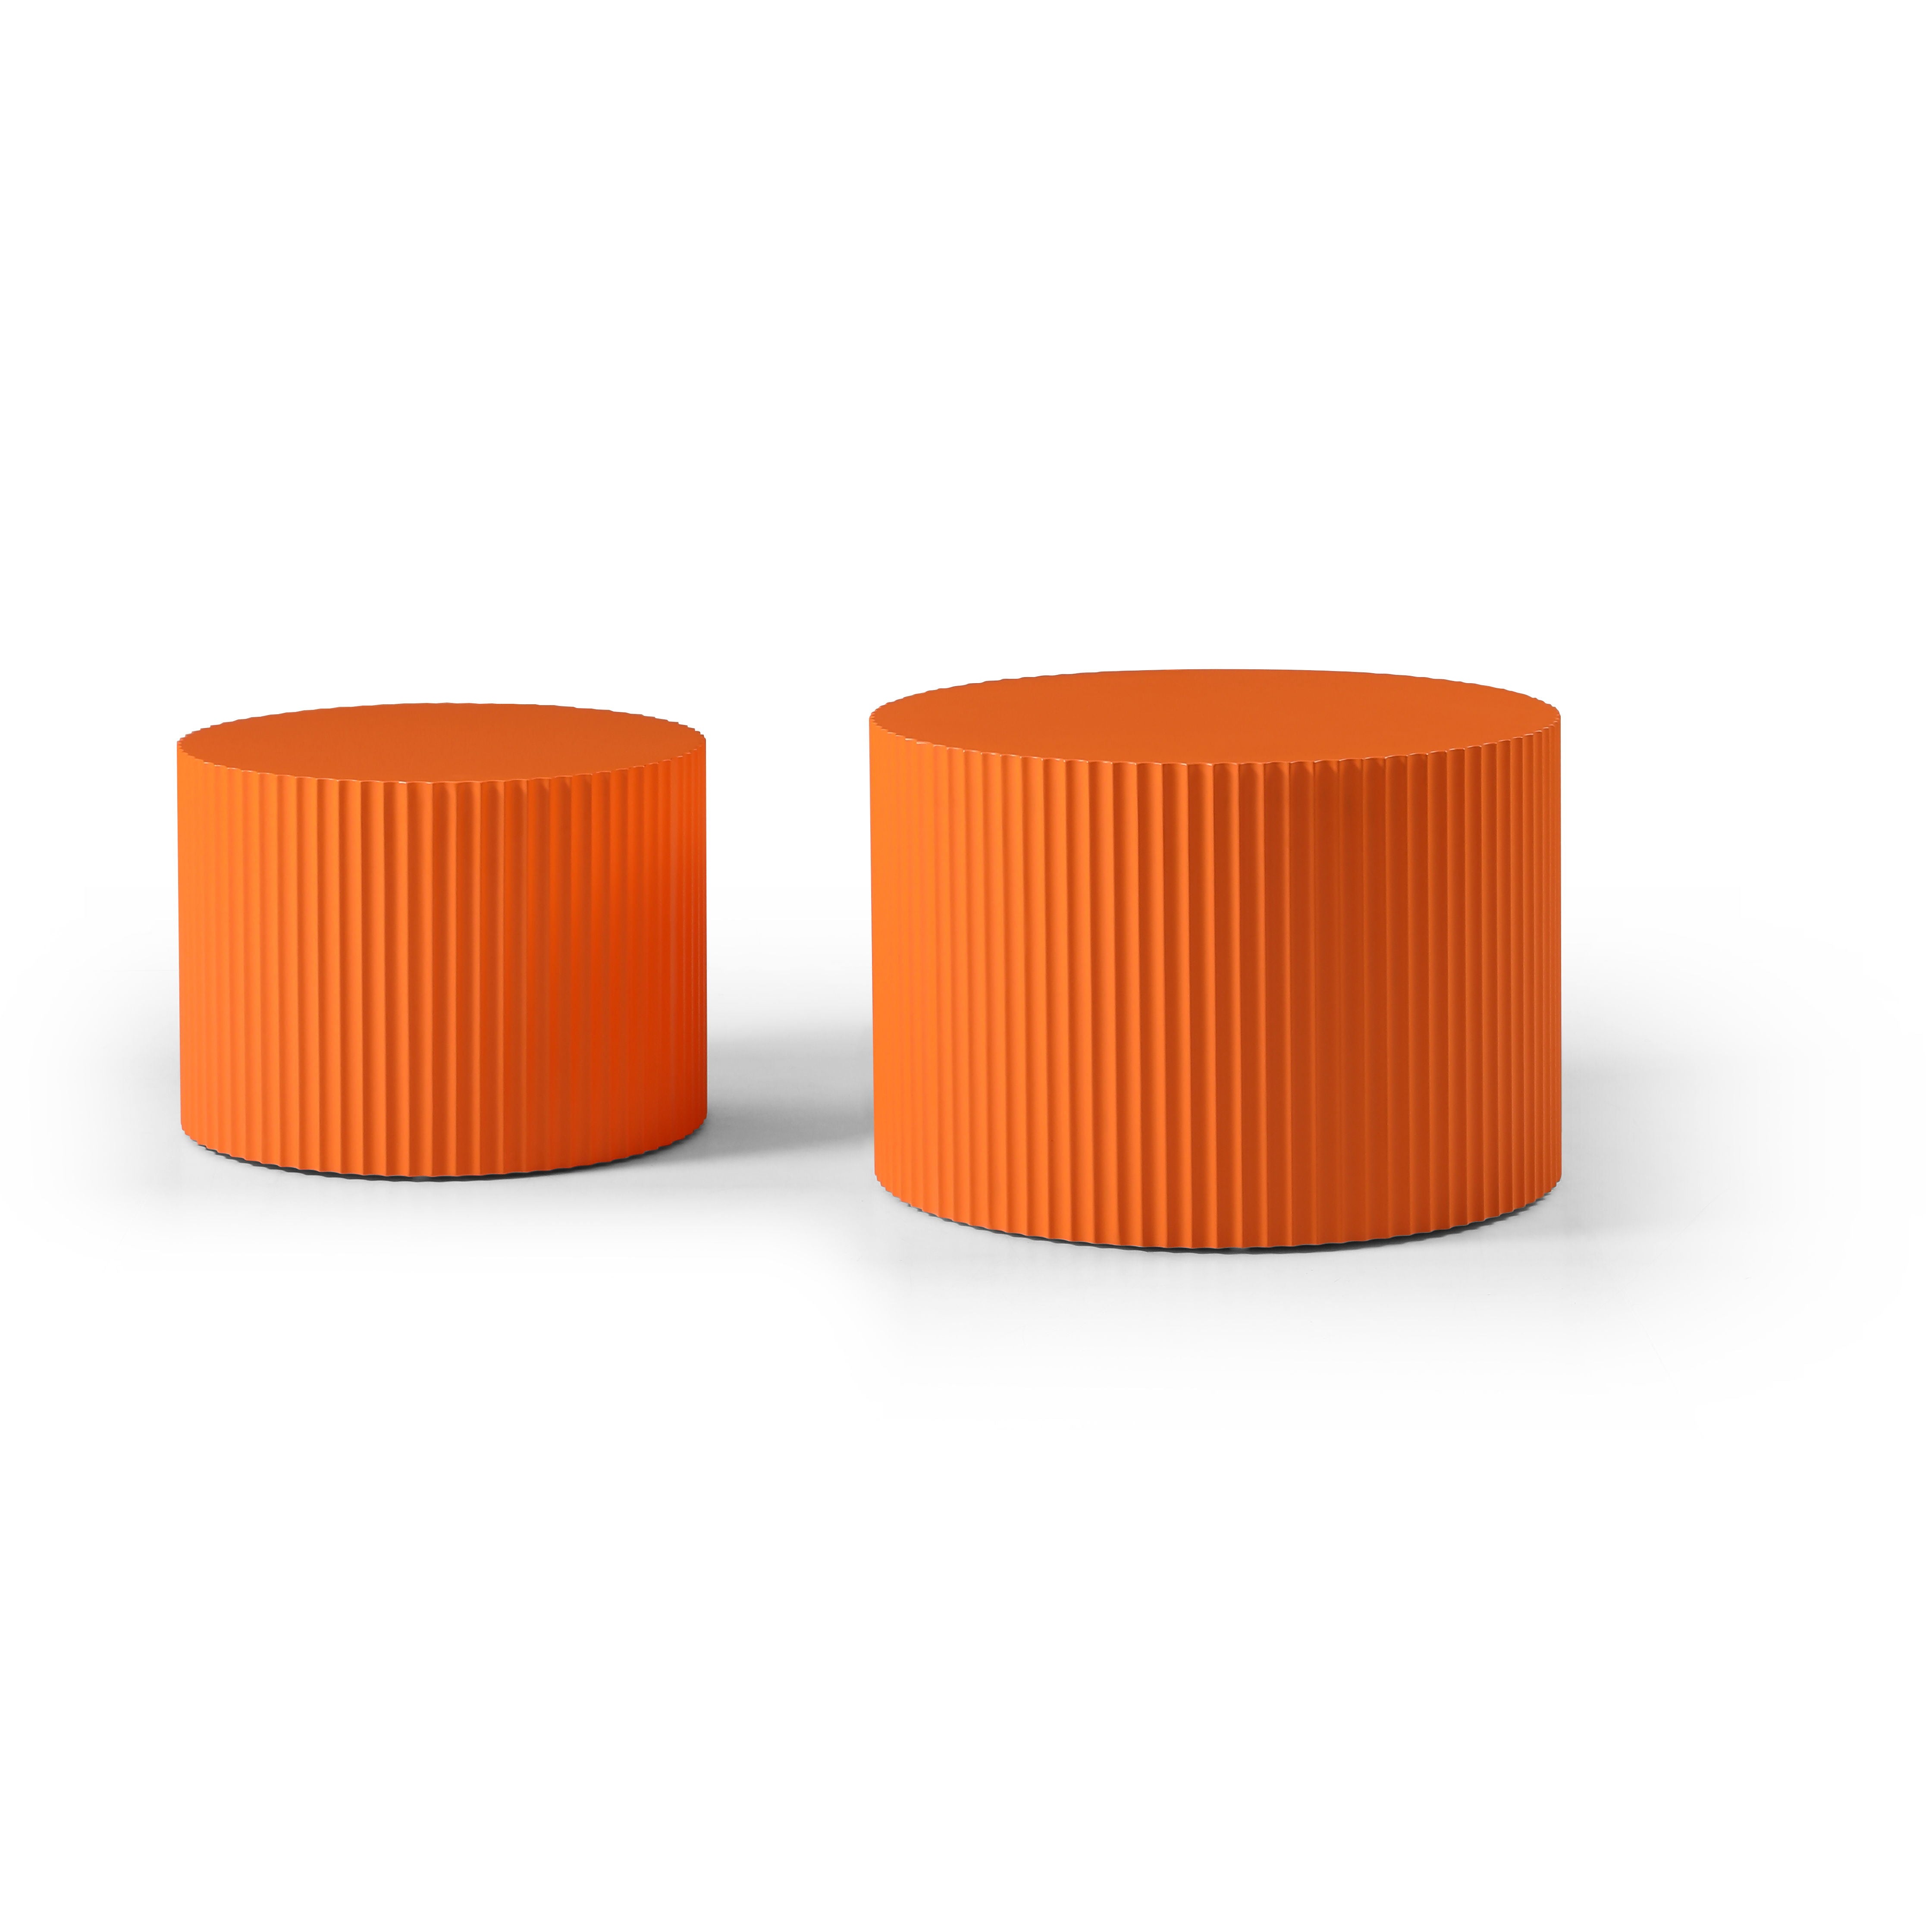 Nesting Table (Set of 2) Handcraft Round Coffee Table For Living Room / Leisure Area, Orange